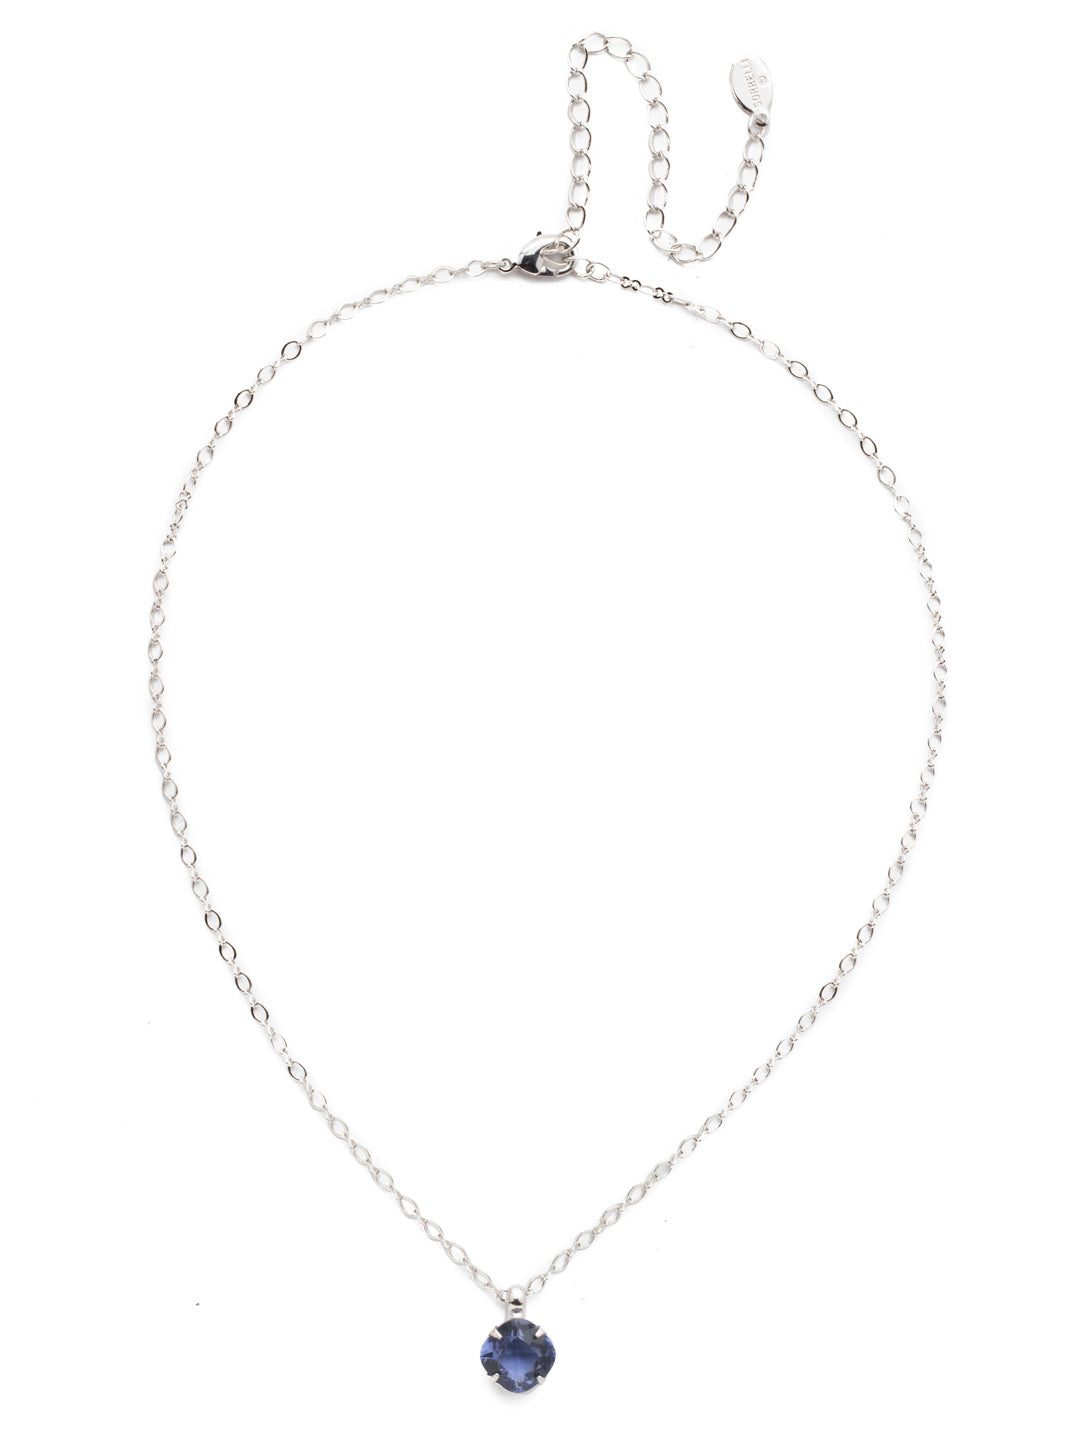 Lilium Pendant Necklace - NEP26RHDT - <p>The Lilium Pendant necklace is the perfect everyday necklace. On a delicate chain hangs a gorgoues crystal stone. From Sorrelli's Dark Tanzanite collection in our Palladium Silver-tone finish.</p>